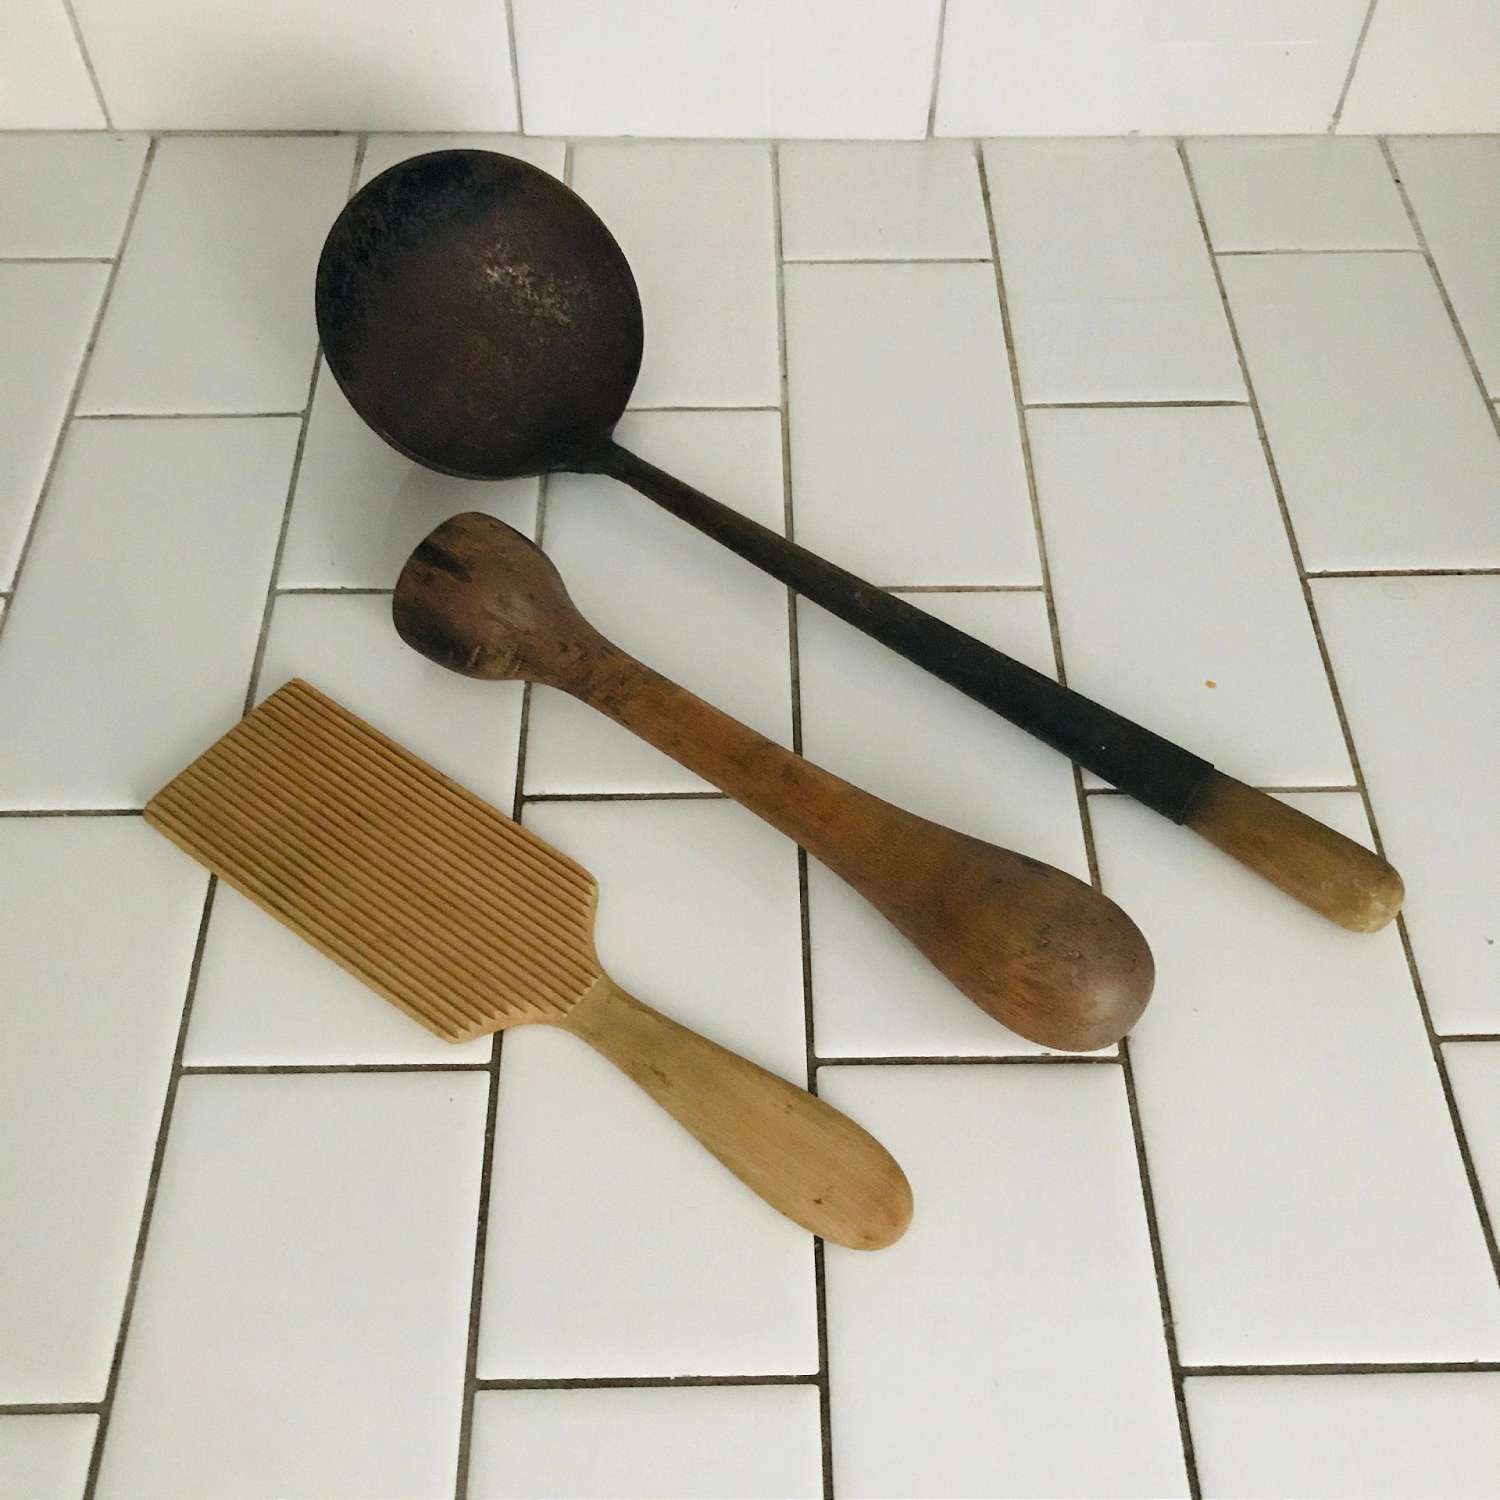 https://www.truevintageantiques.com/wp-content/uploads/2019/12/primitive-kitchen-tools-iron-ladle-wooden-zester-and-masher-collectible-farmhouse-cabin-lodge-wall-decor-antique-kitchen-display-gadgets-5df2517a1-scaled.jpg